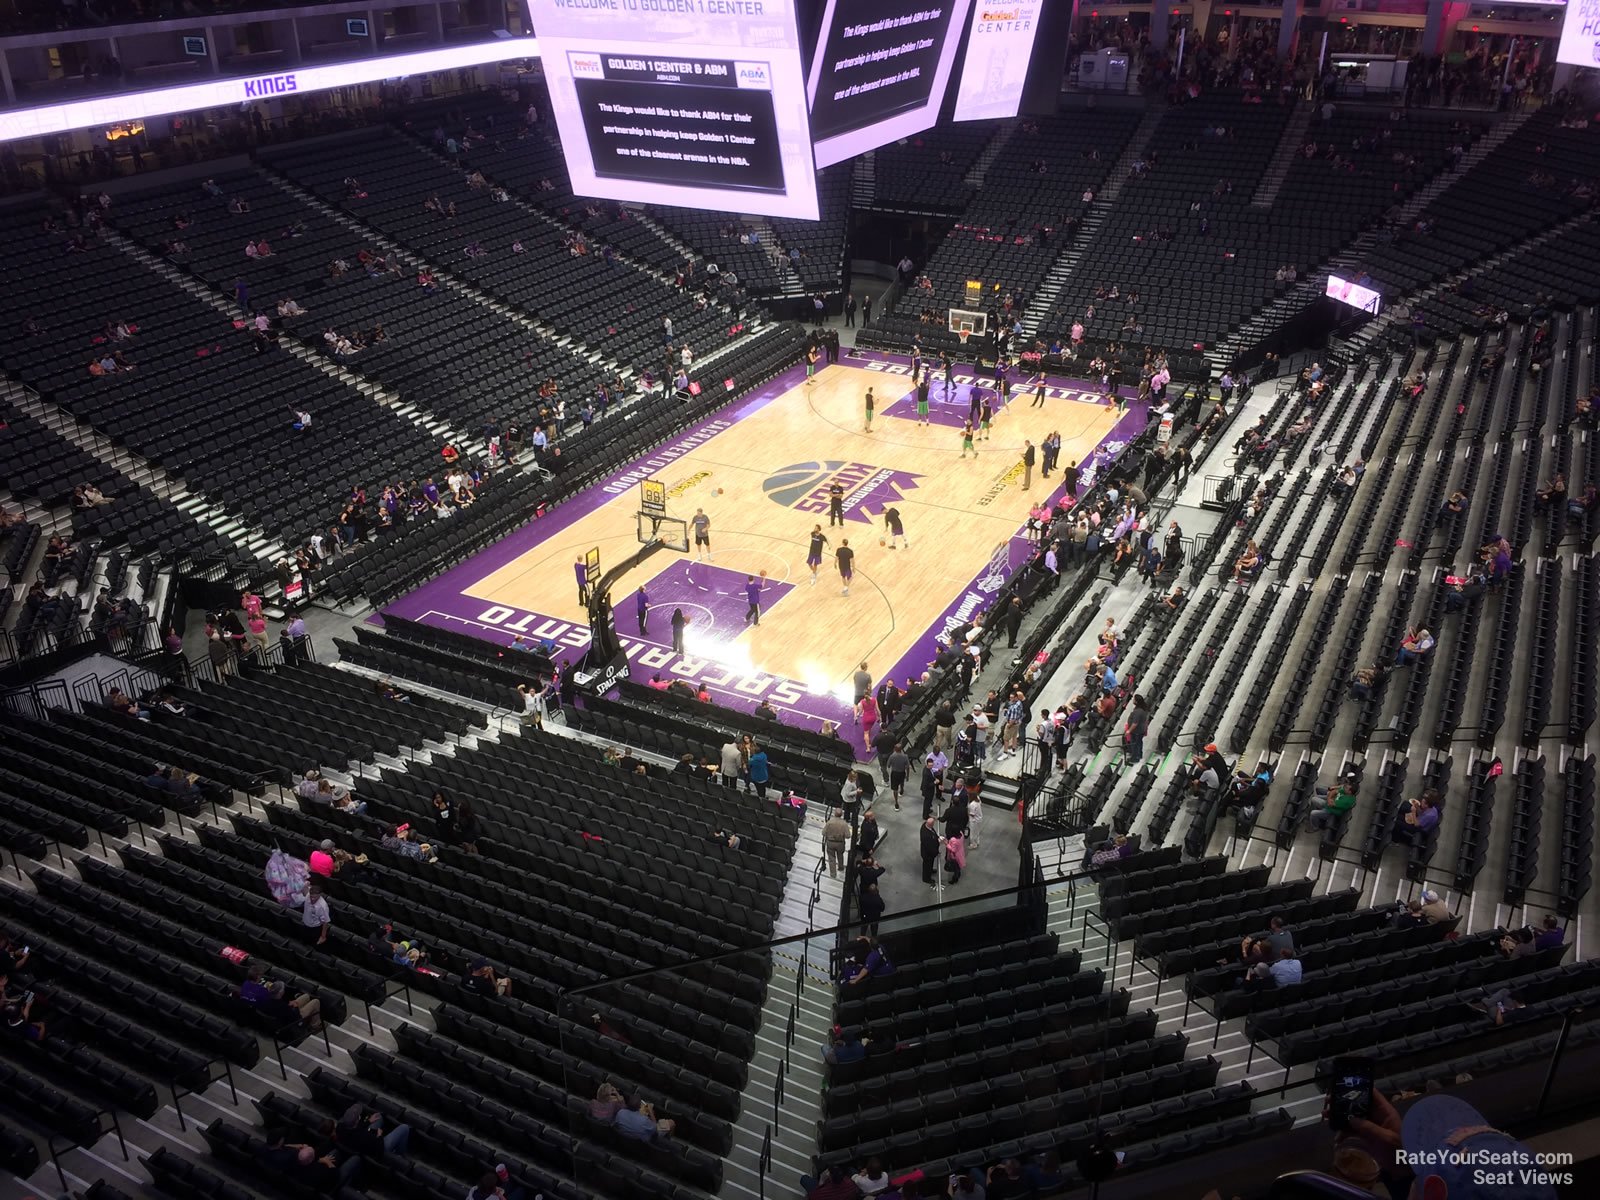 section 209, row a seat view  for basketball - golden 1 center